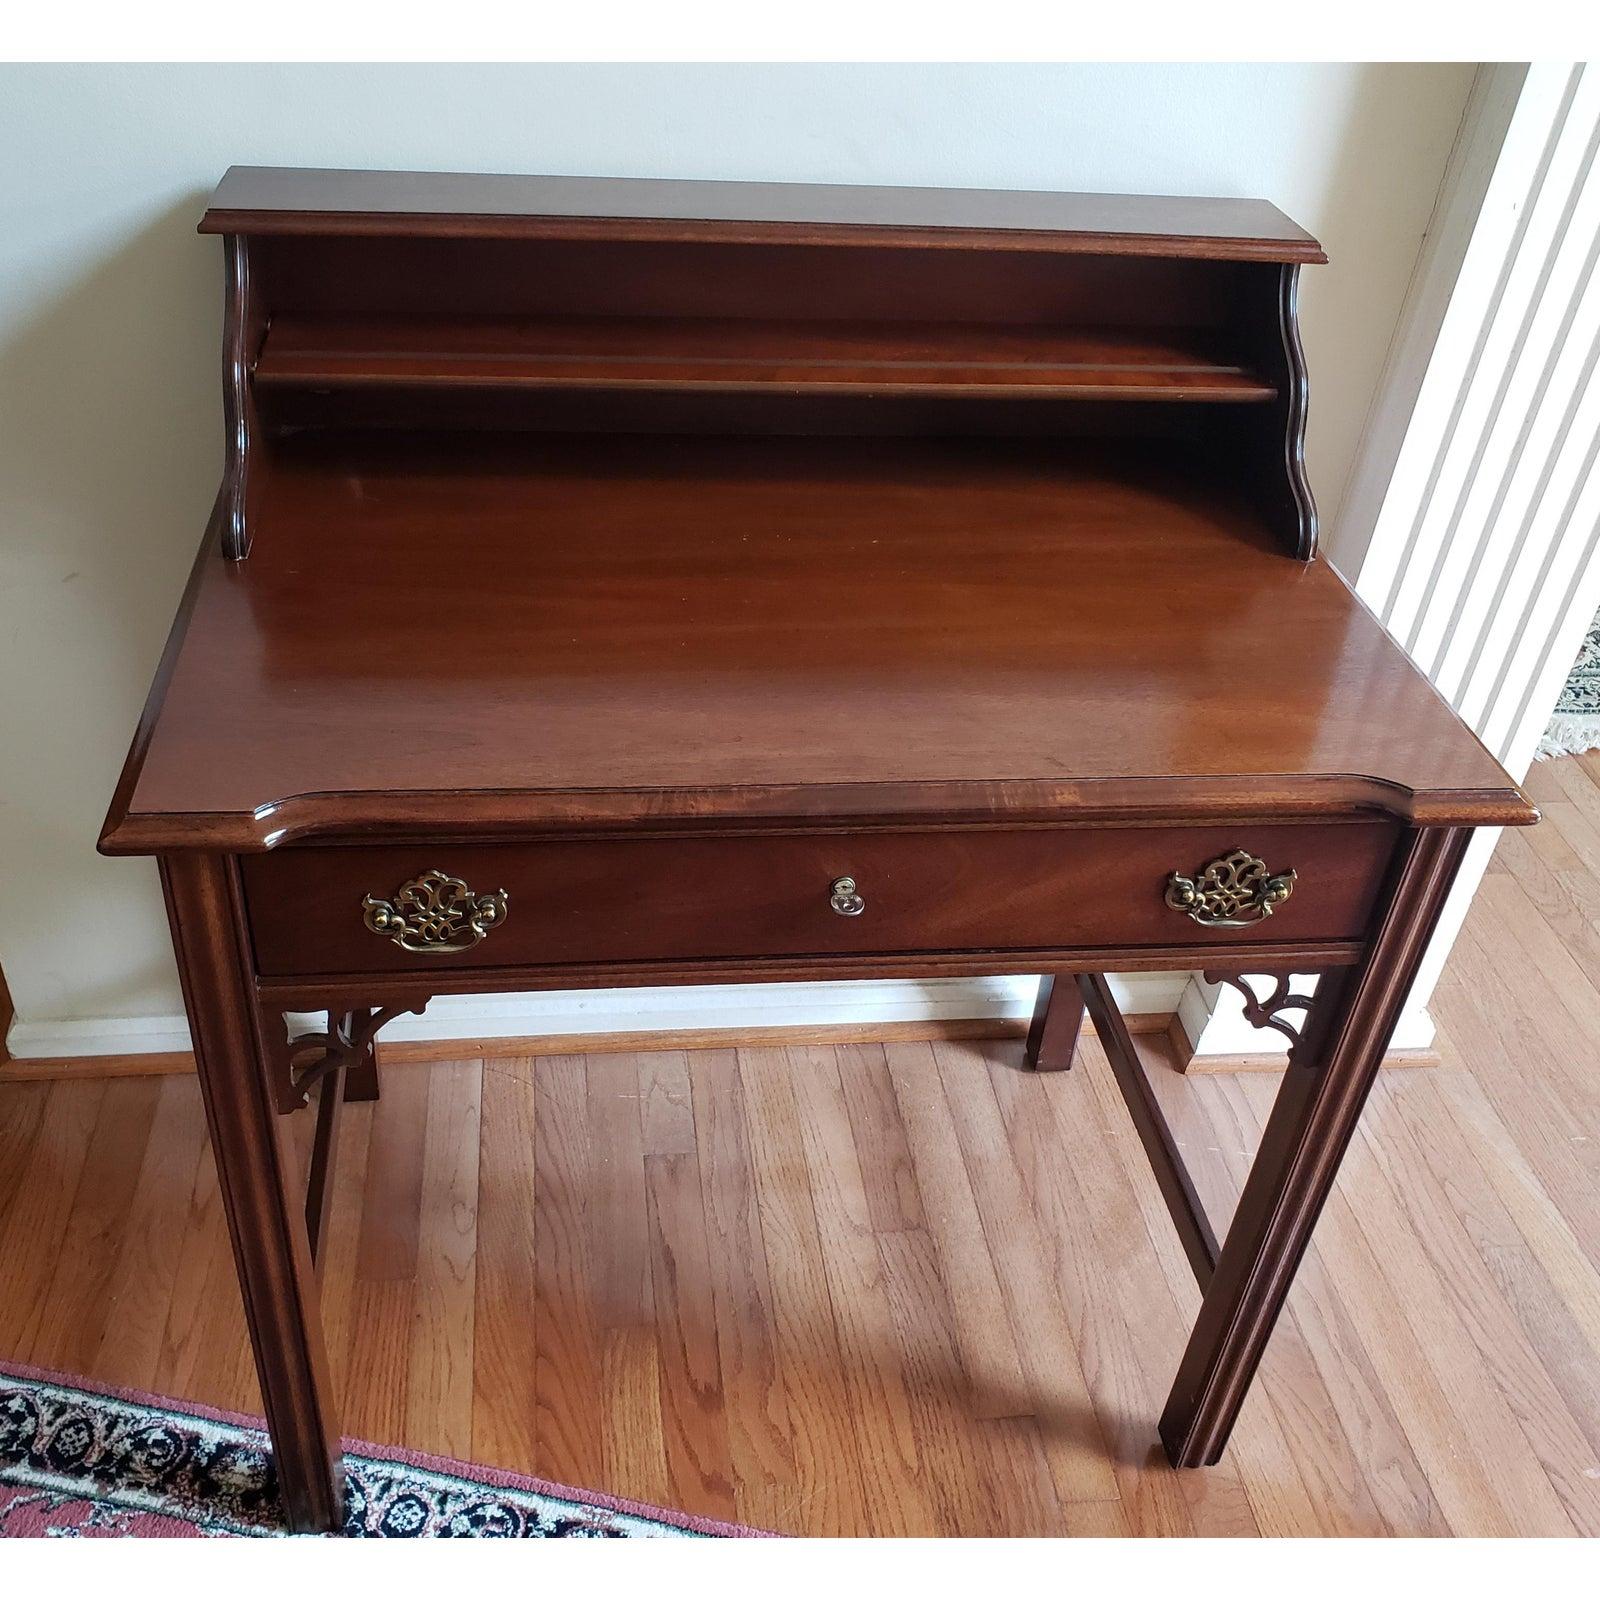 Vintage Mahogany Chippendale writing desk by National Mount Airy Furniture of North Carolina. 
Measures 34 W x 23.25